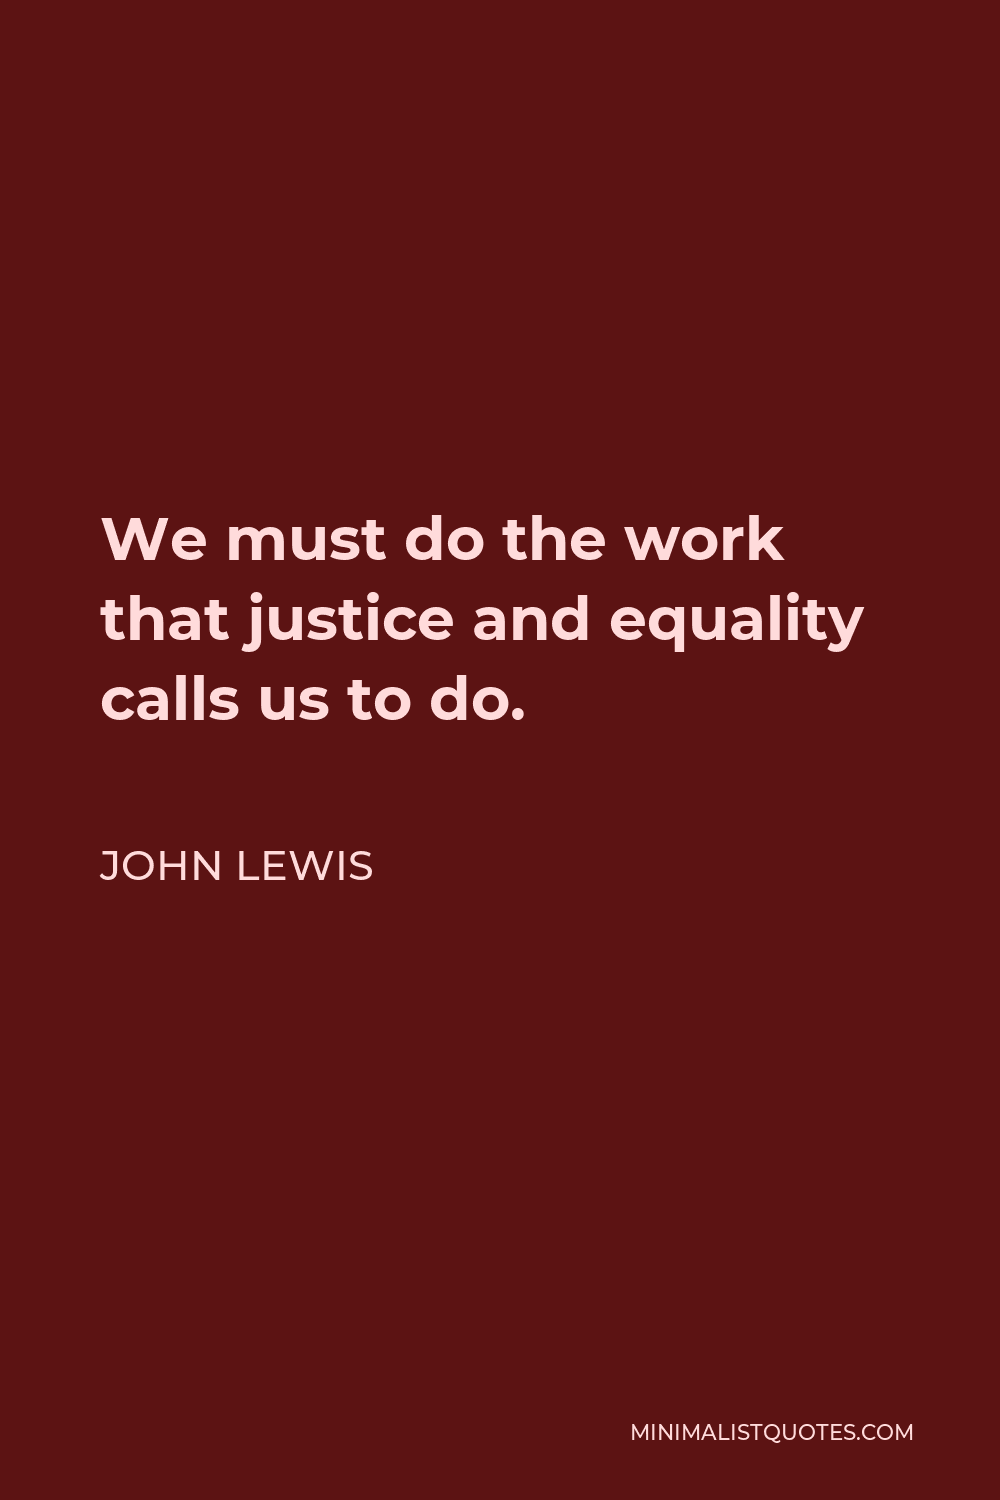 John Lewis Quote - We must do the work that justice and equality calls us to do.